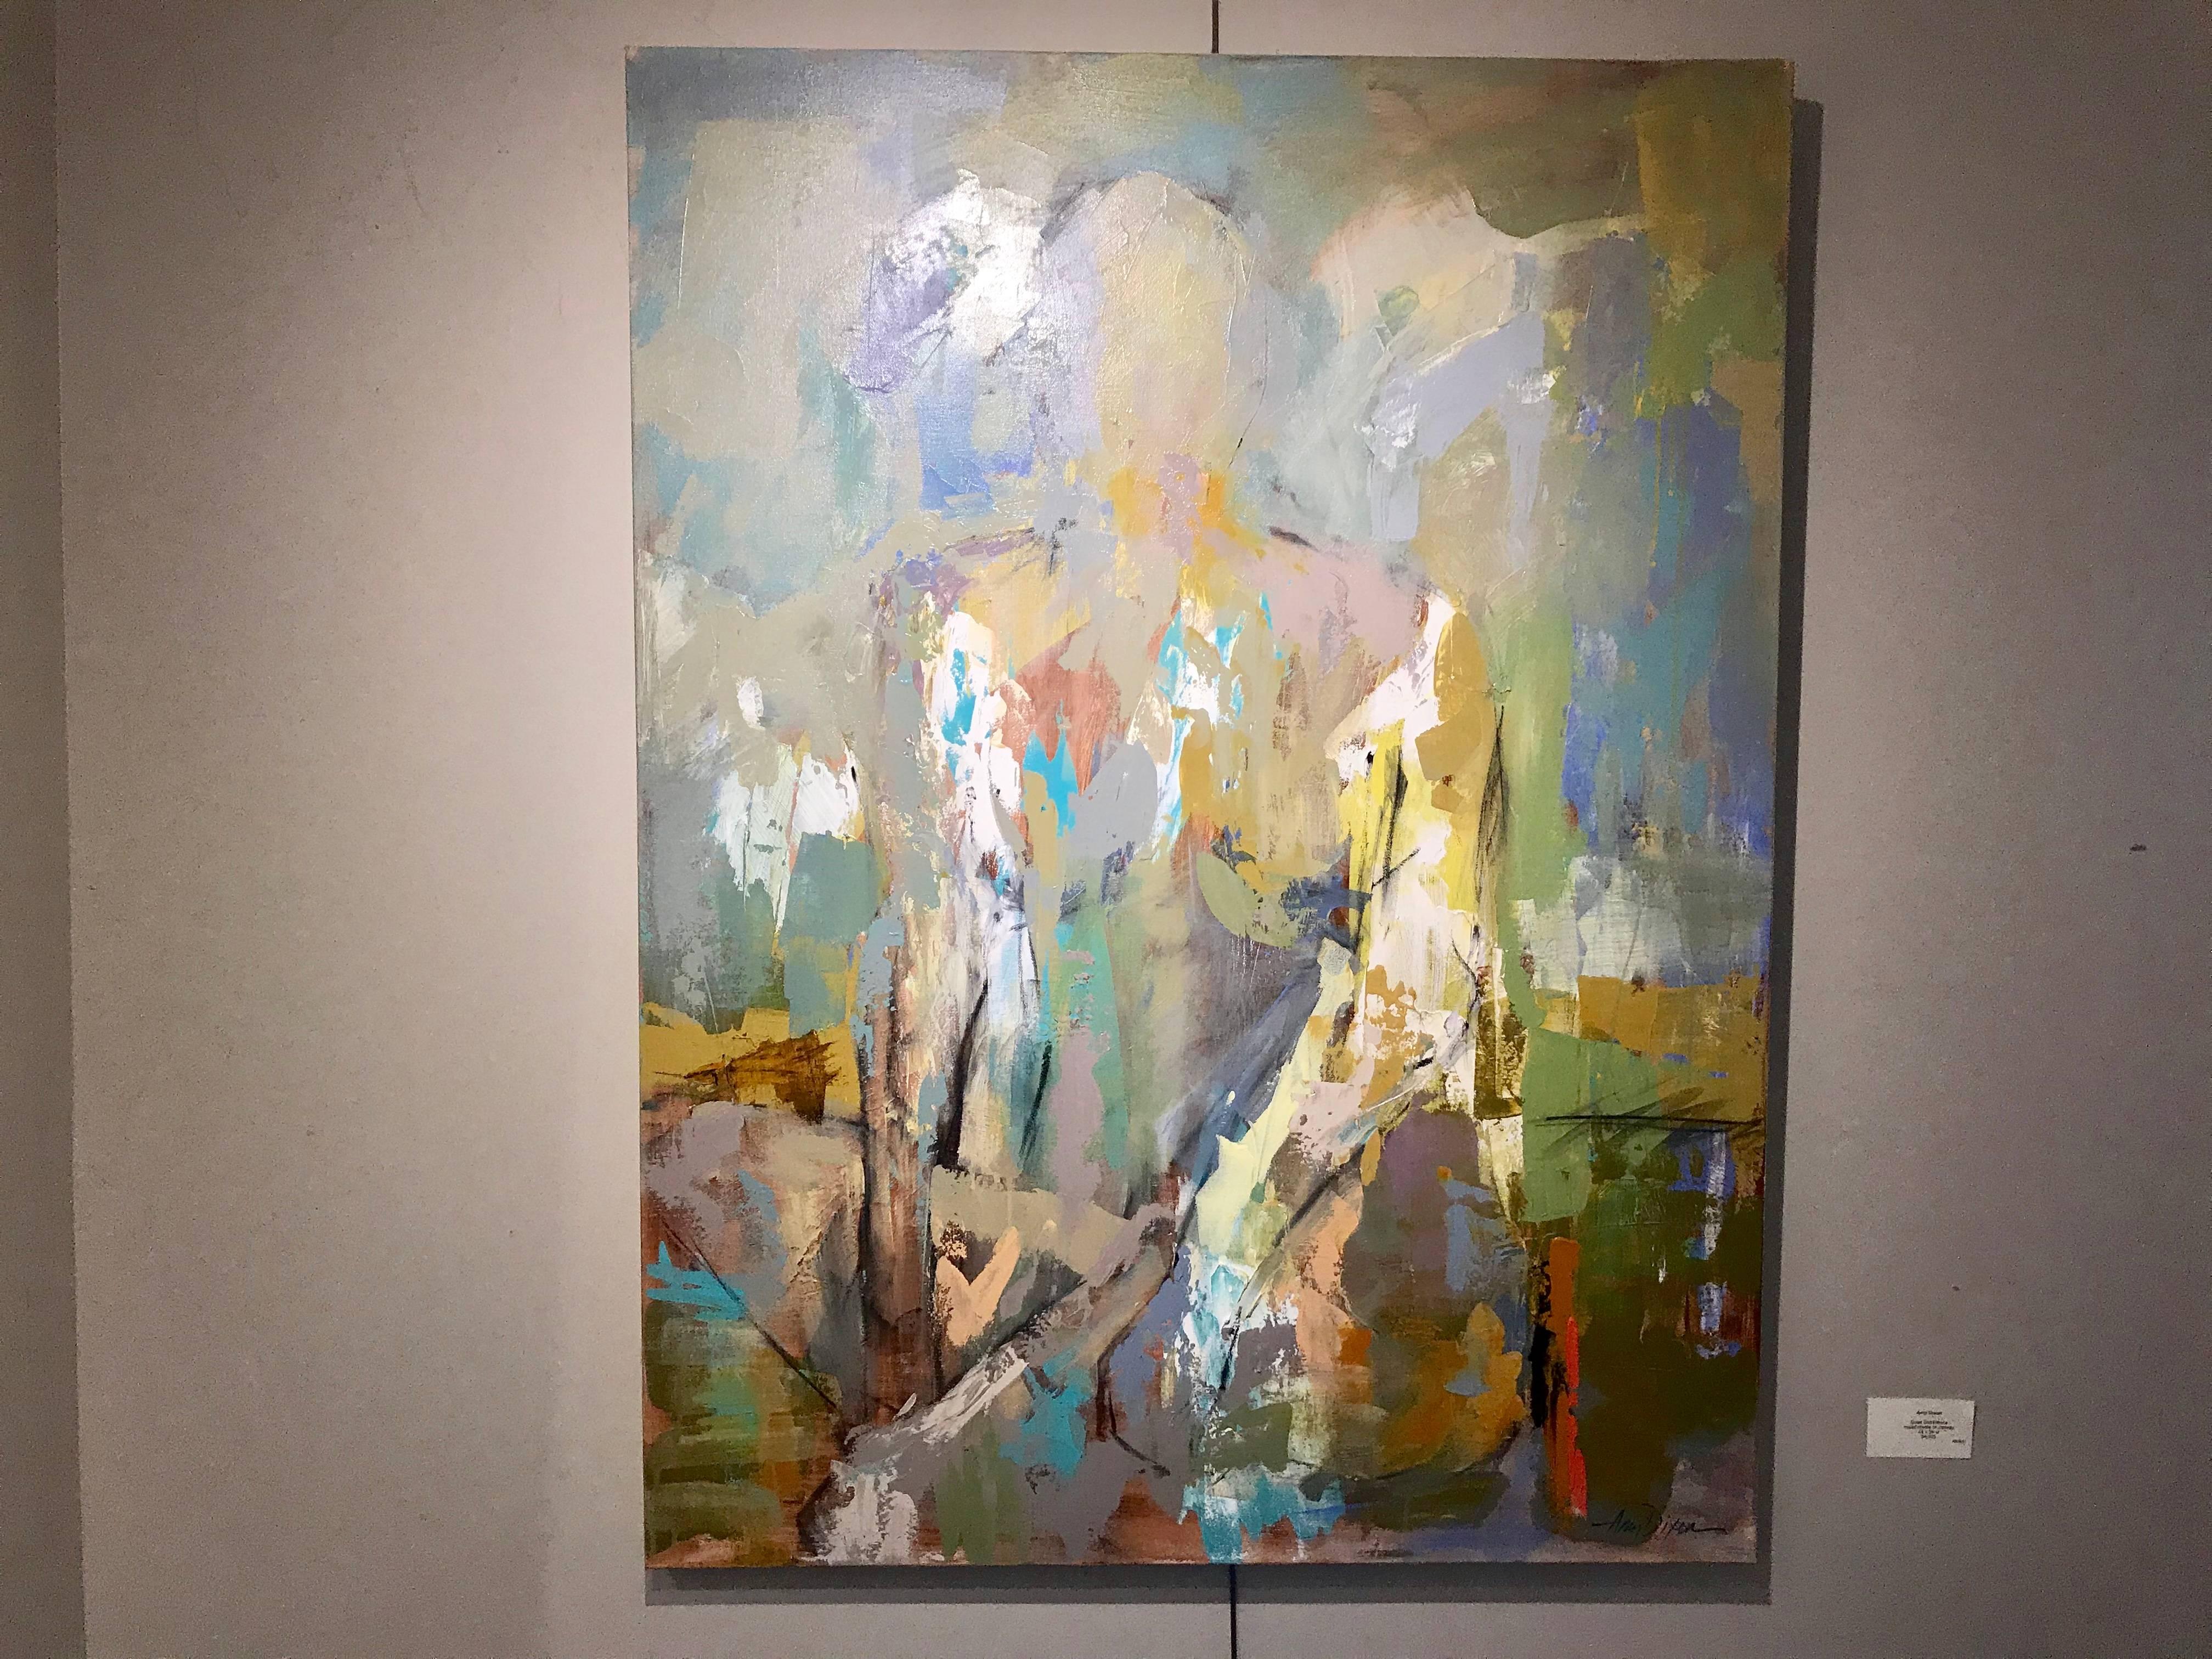 'Quiet Confidence' is a large format abstract mixed media on canvas painting created in 2018 by Colorado-born artist Amy Dixon. Featuring a soft palette made of tans, turquoise and soft blue tones, accented by orange, brown and pink touches, this